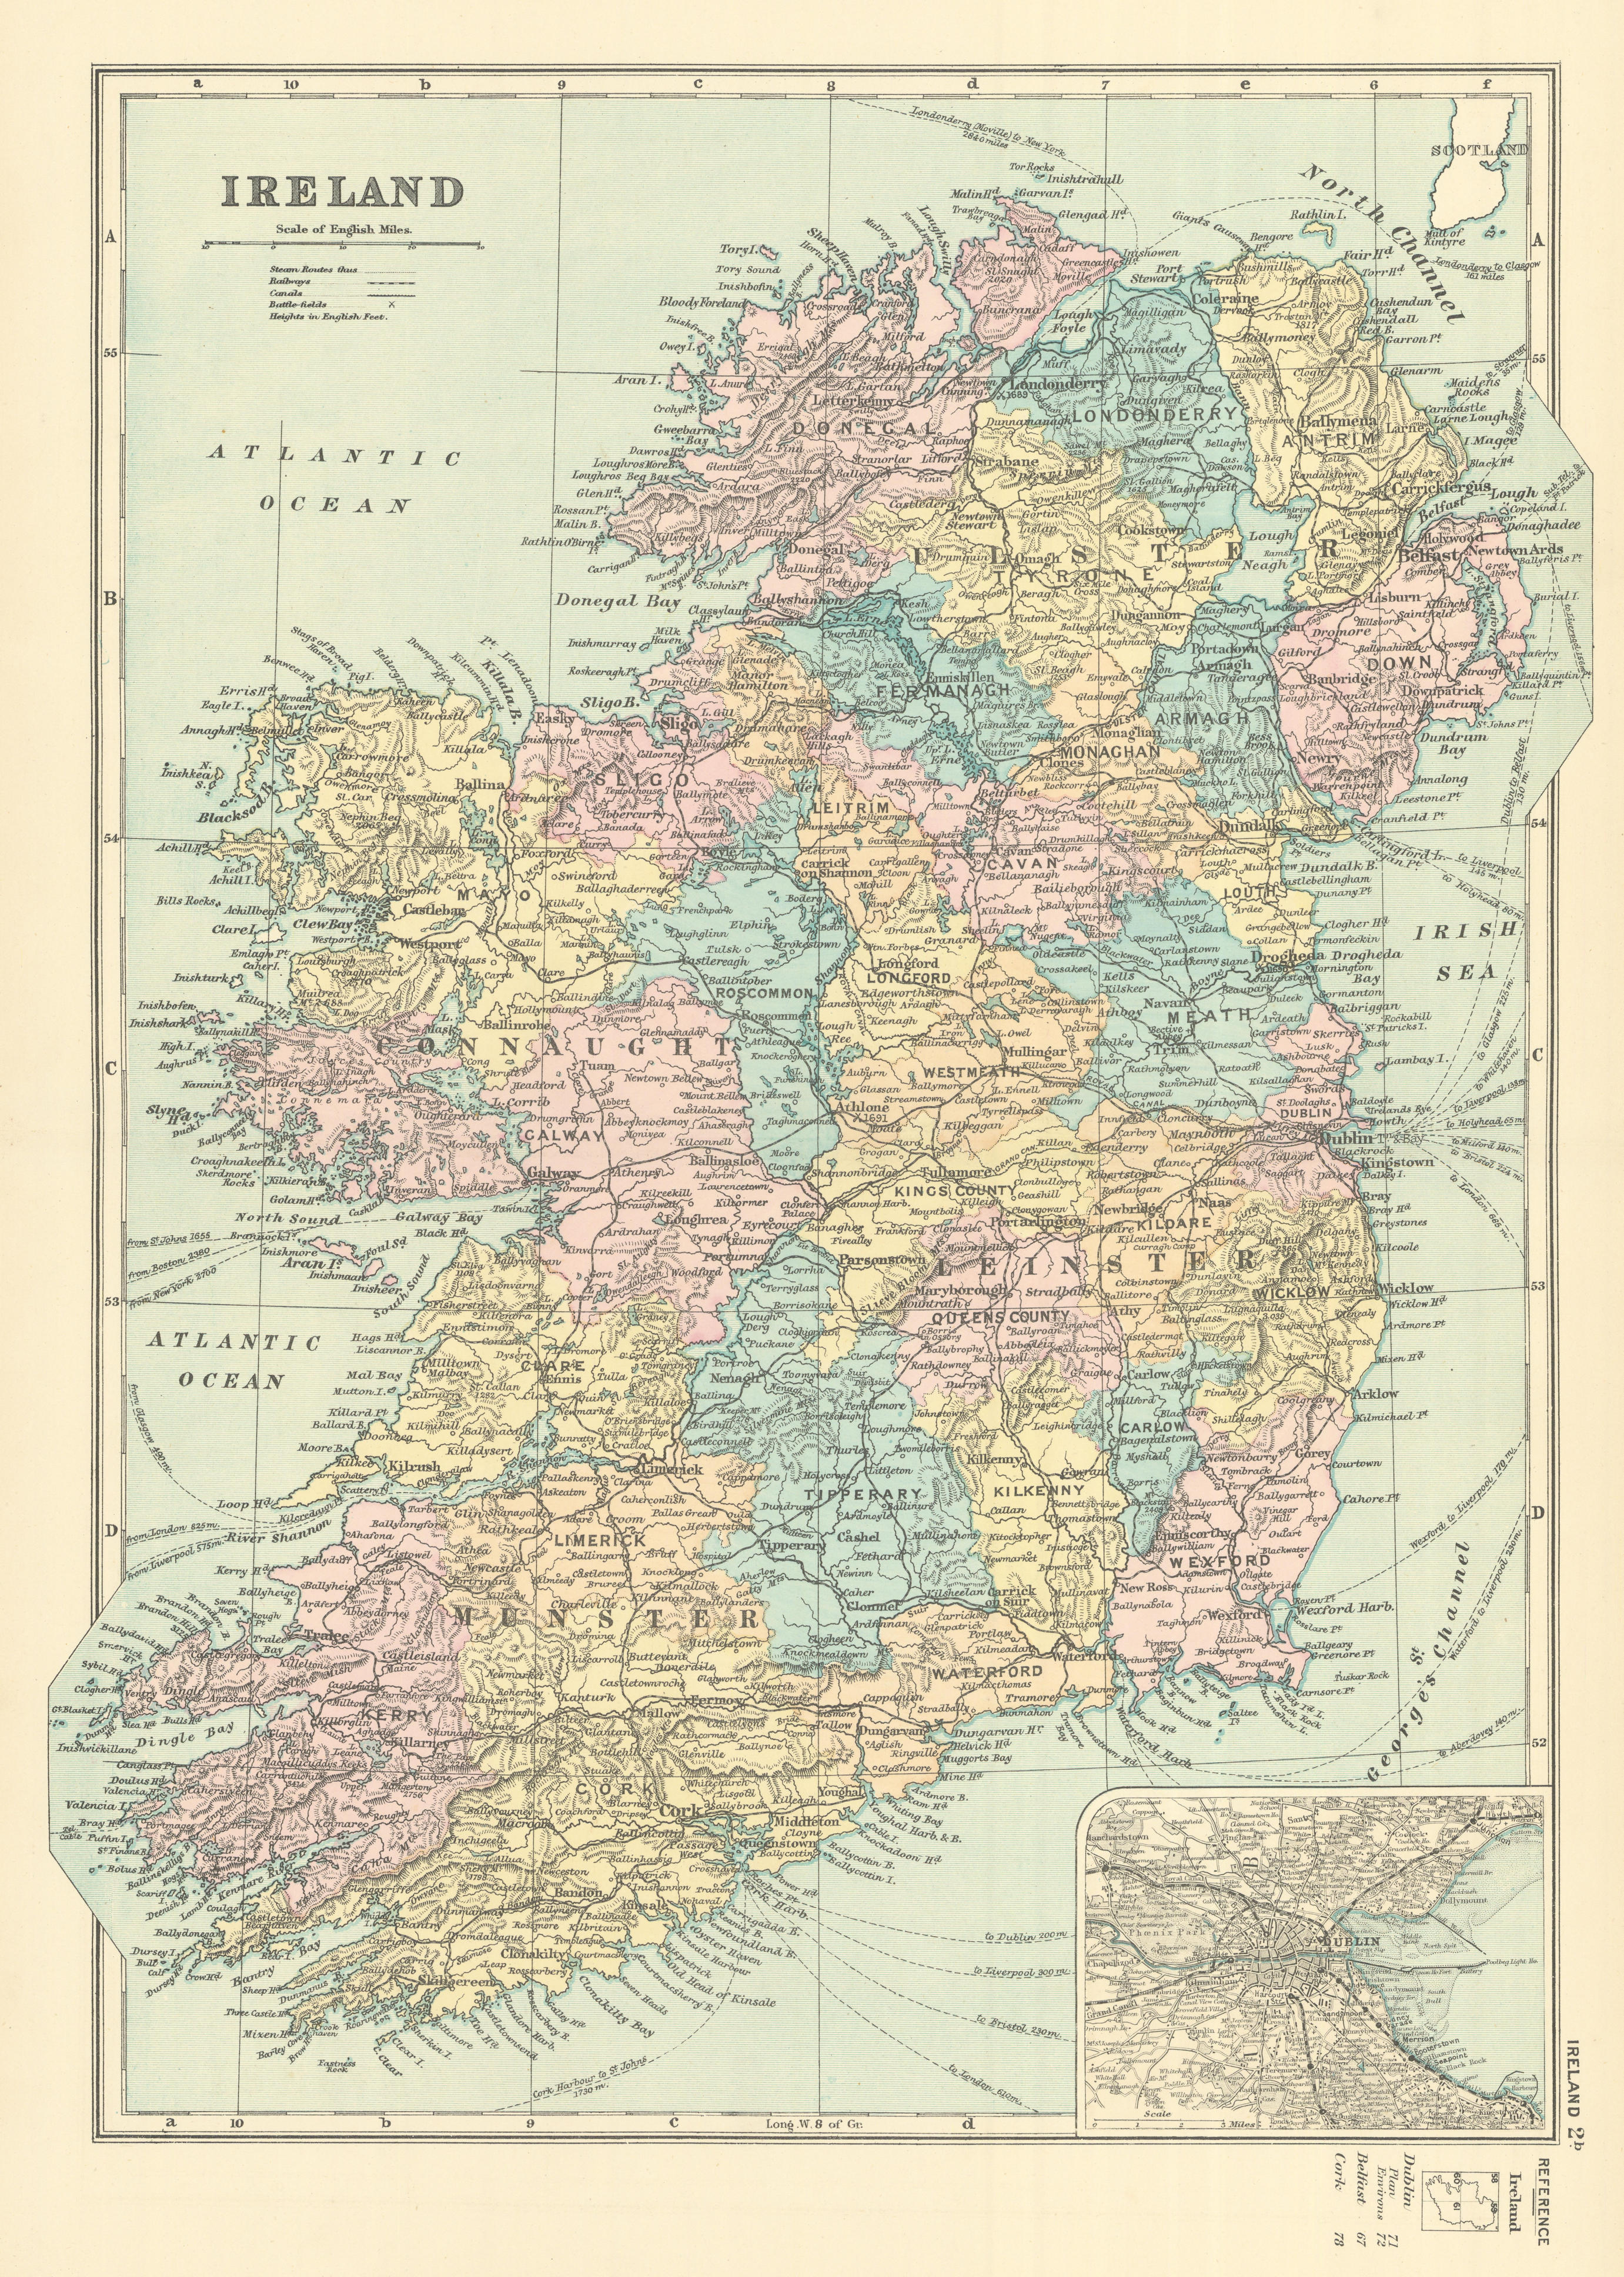 Associate Product IRELAND in counties. Dublin inset. Antique map by GW BACON 1891 old